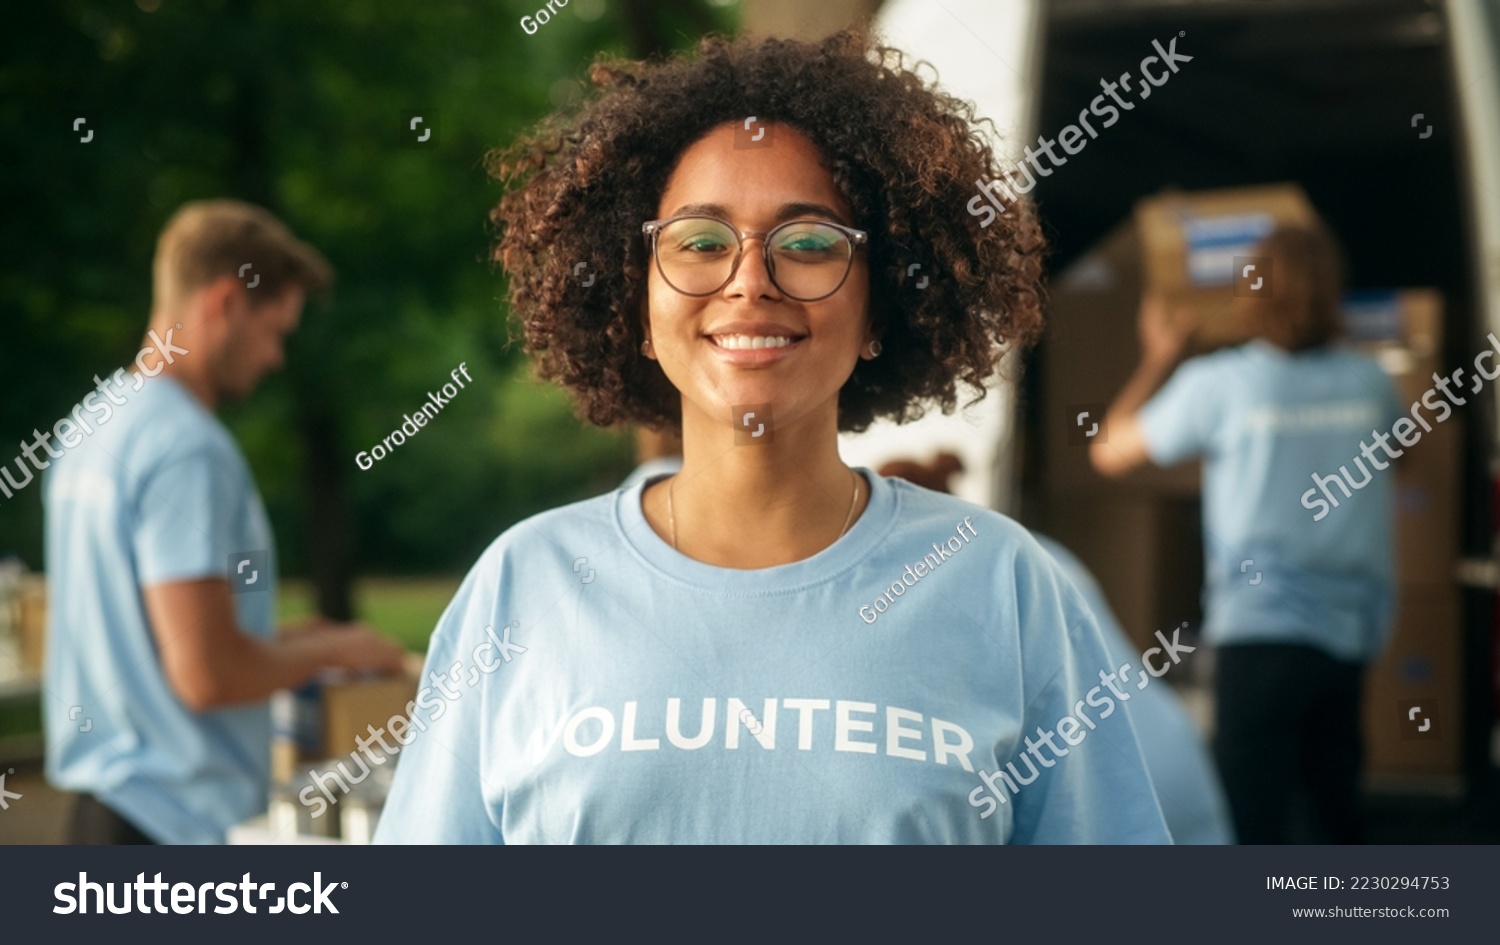 Portrait of a Happy Helpful Black Female Volunteer. Young Adult Multiethnic Latina with Afro Hair, Wearing Glasses, Smiling, Posing for Camera. Humanitarian Aid and Volunteering Concept. #2230294753